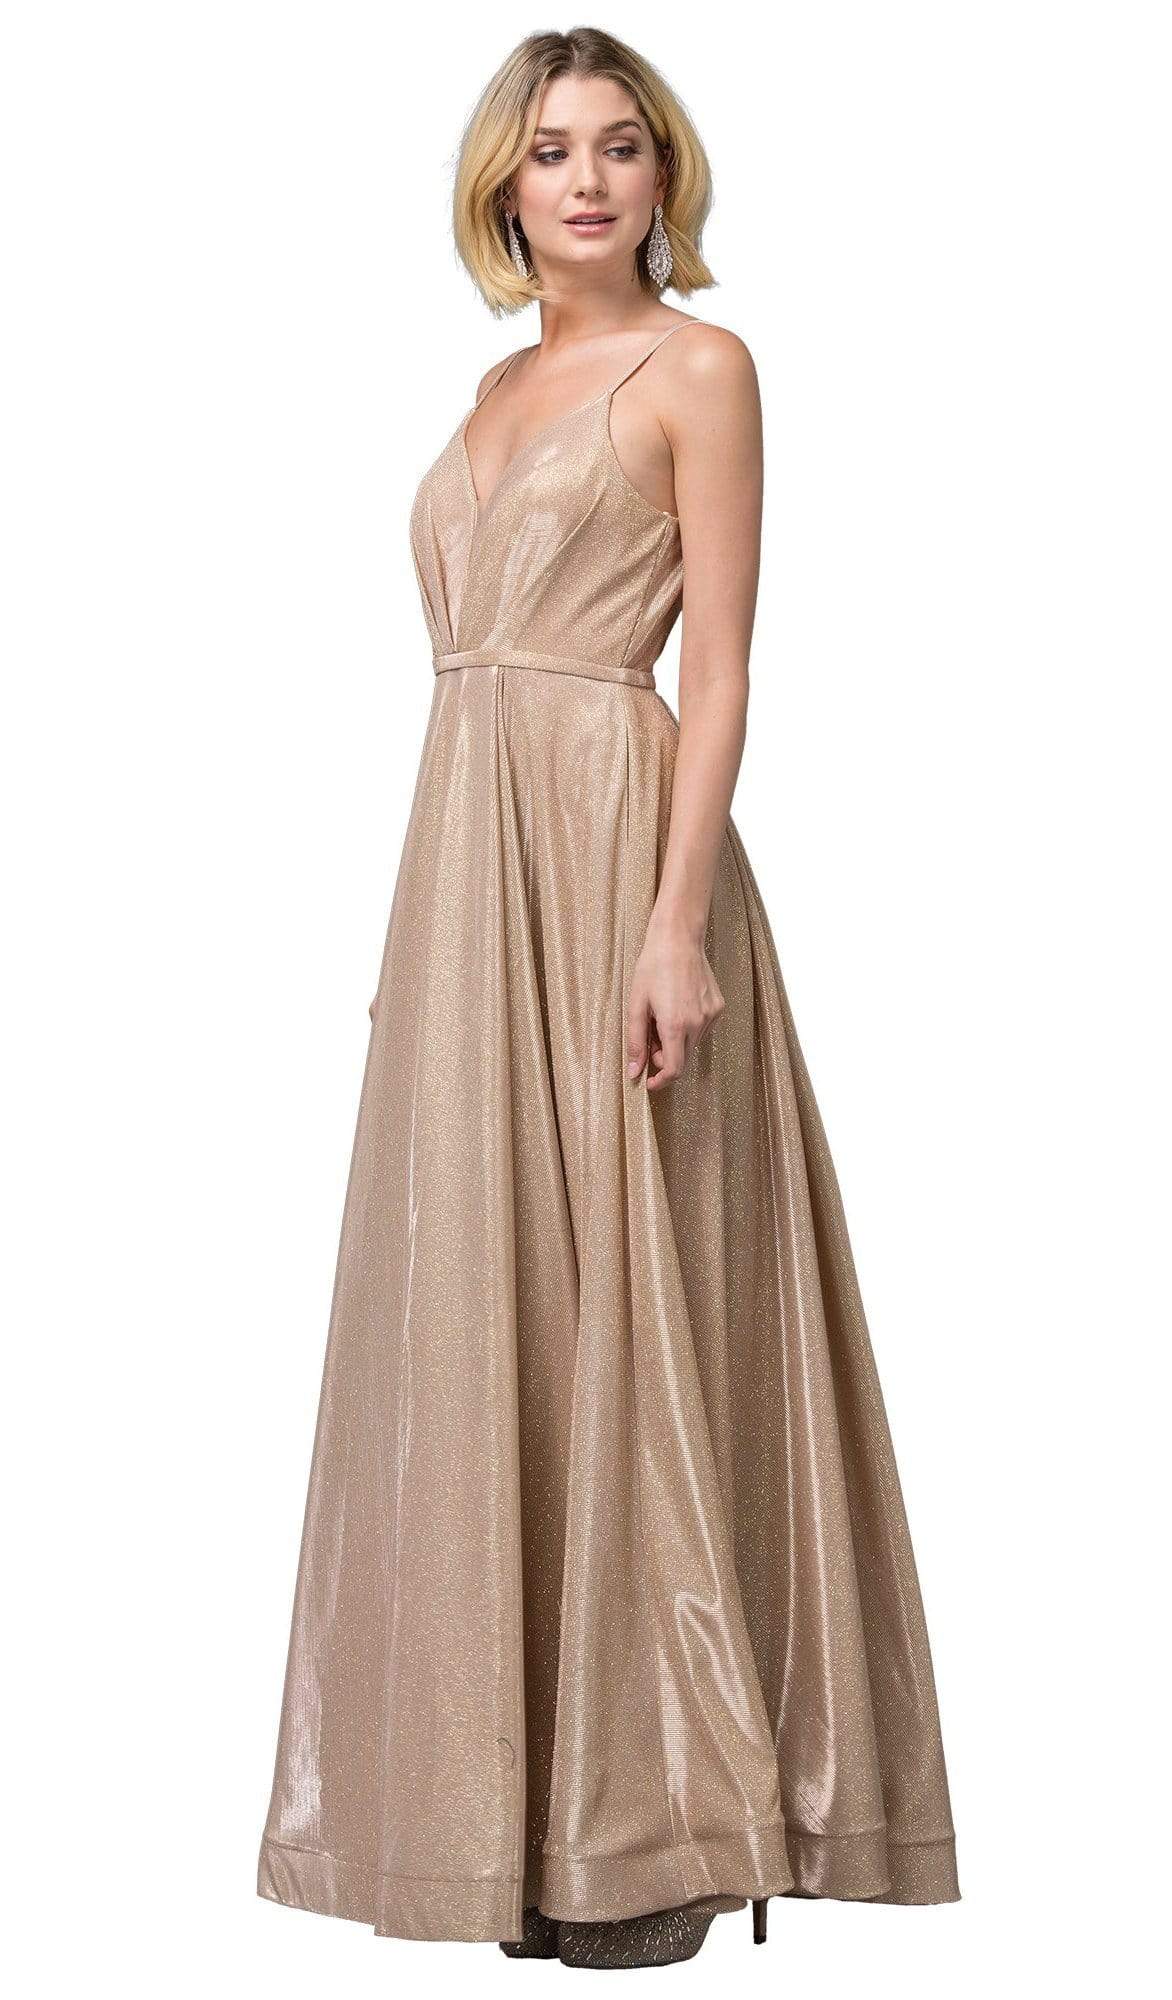 Dancing Queen - 2867 Sleeveless Plunging V-neck A-line Gown